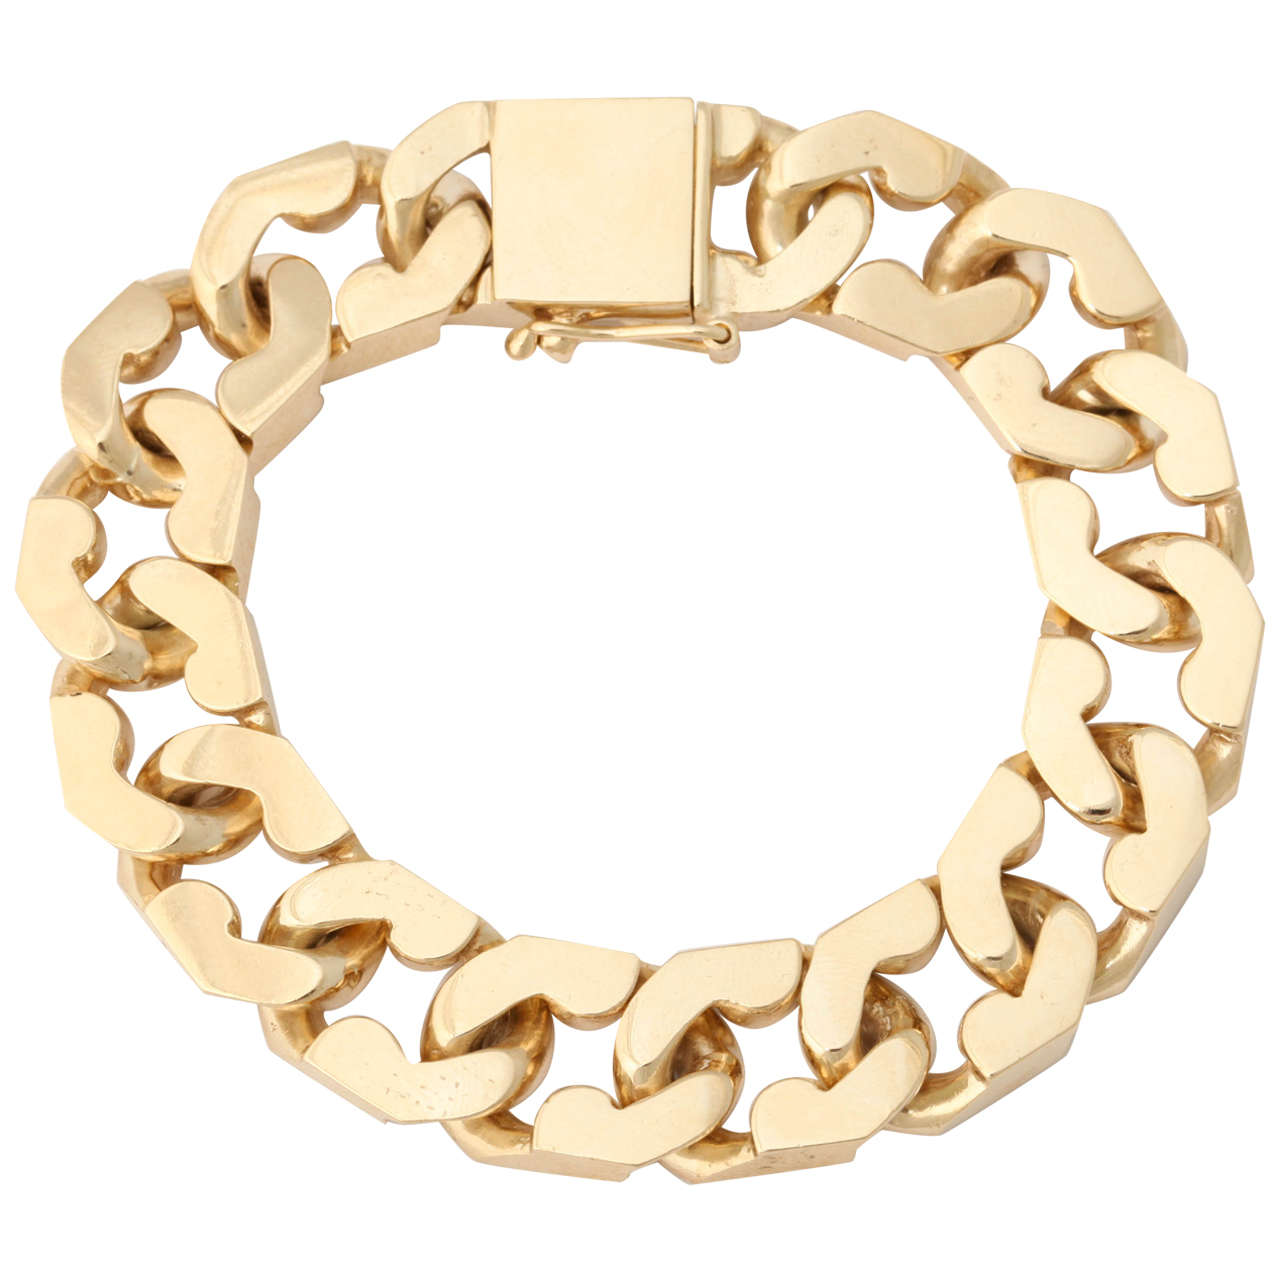 14 KT Yellow Gold High Polish Jagged Open Curb Link Heavy Flexible Bracelet Designed by Tiffany & Co. in the 1940s
Bracelet May Be Worn With A Watch, Alone or With Other Bracelets
Weight of Bracelet 75.4 Grams
1/2 Inch Wide
7 Inches Long